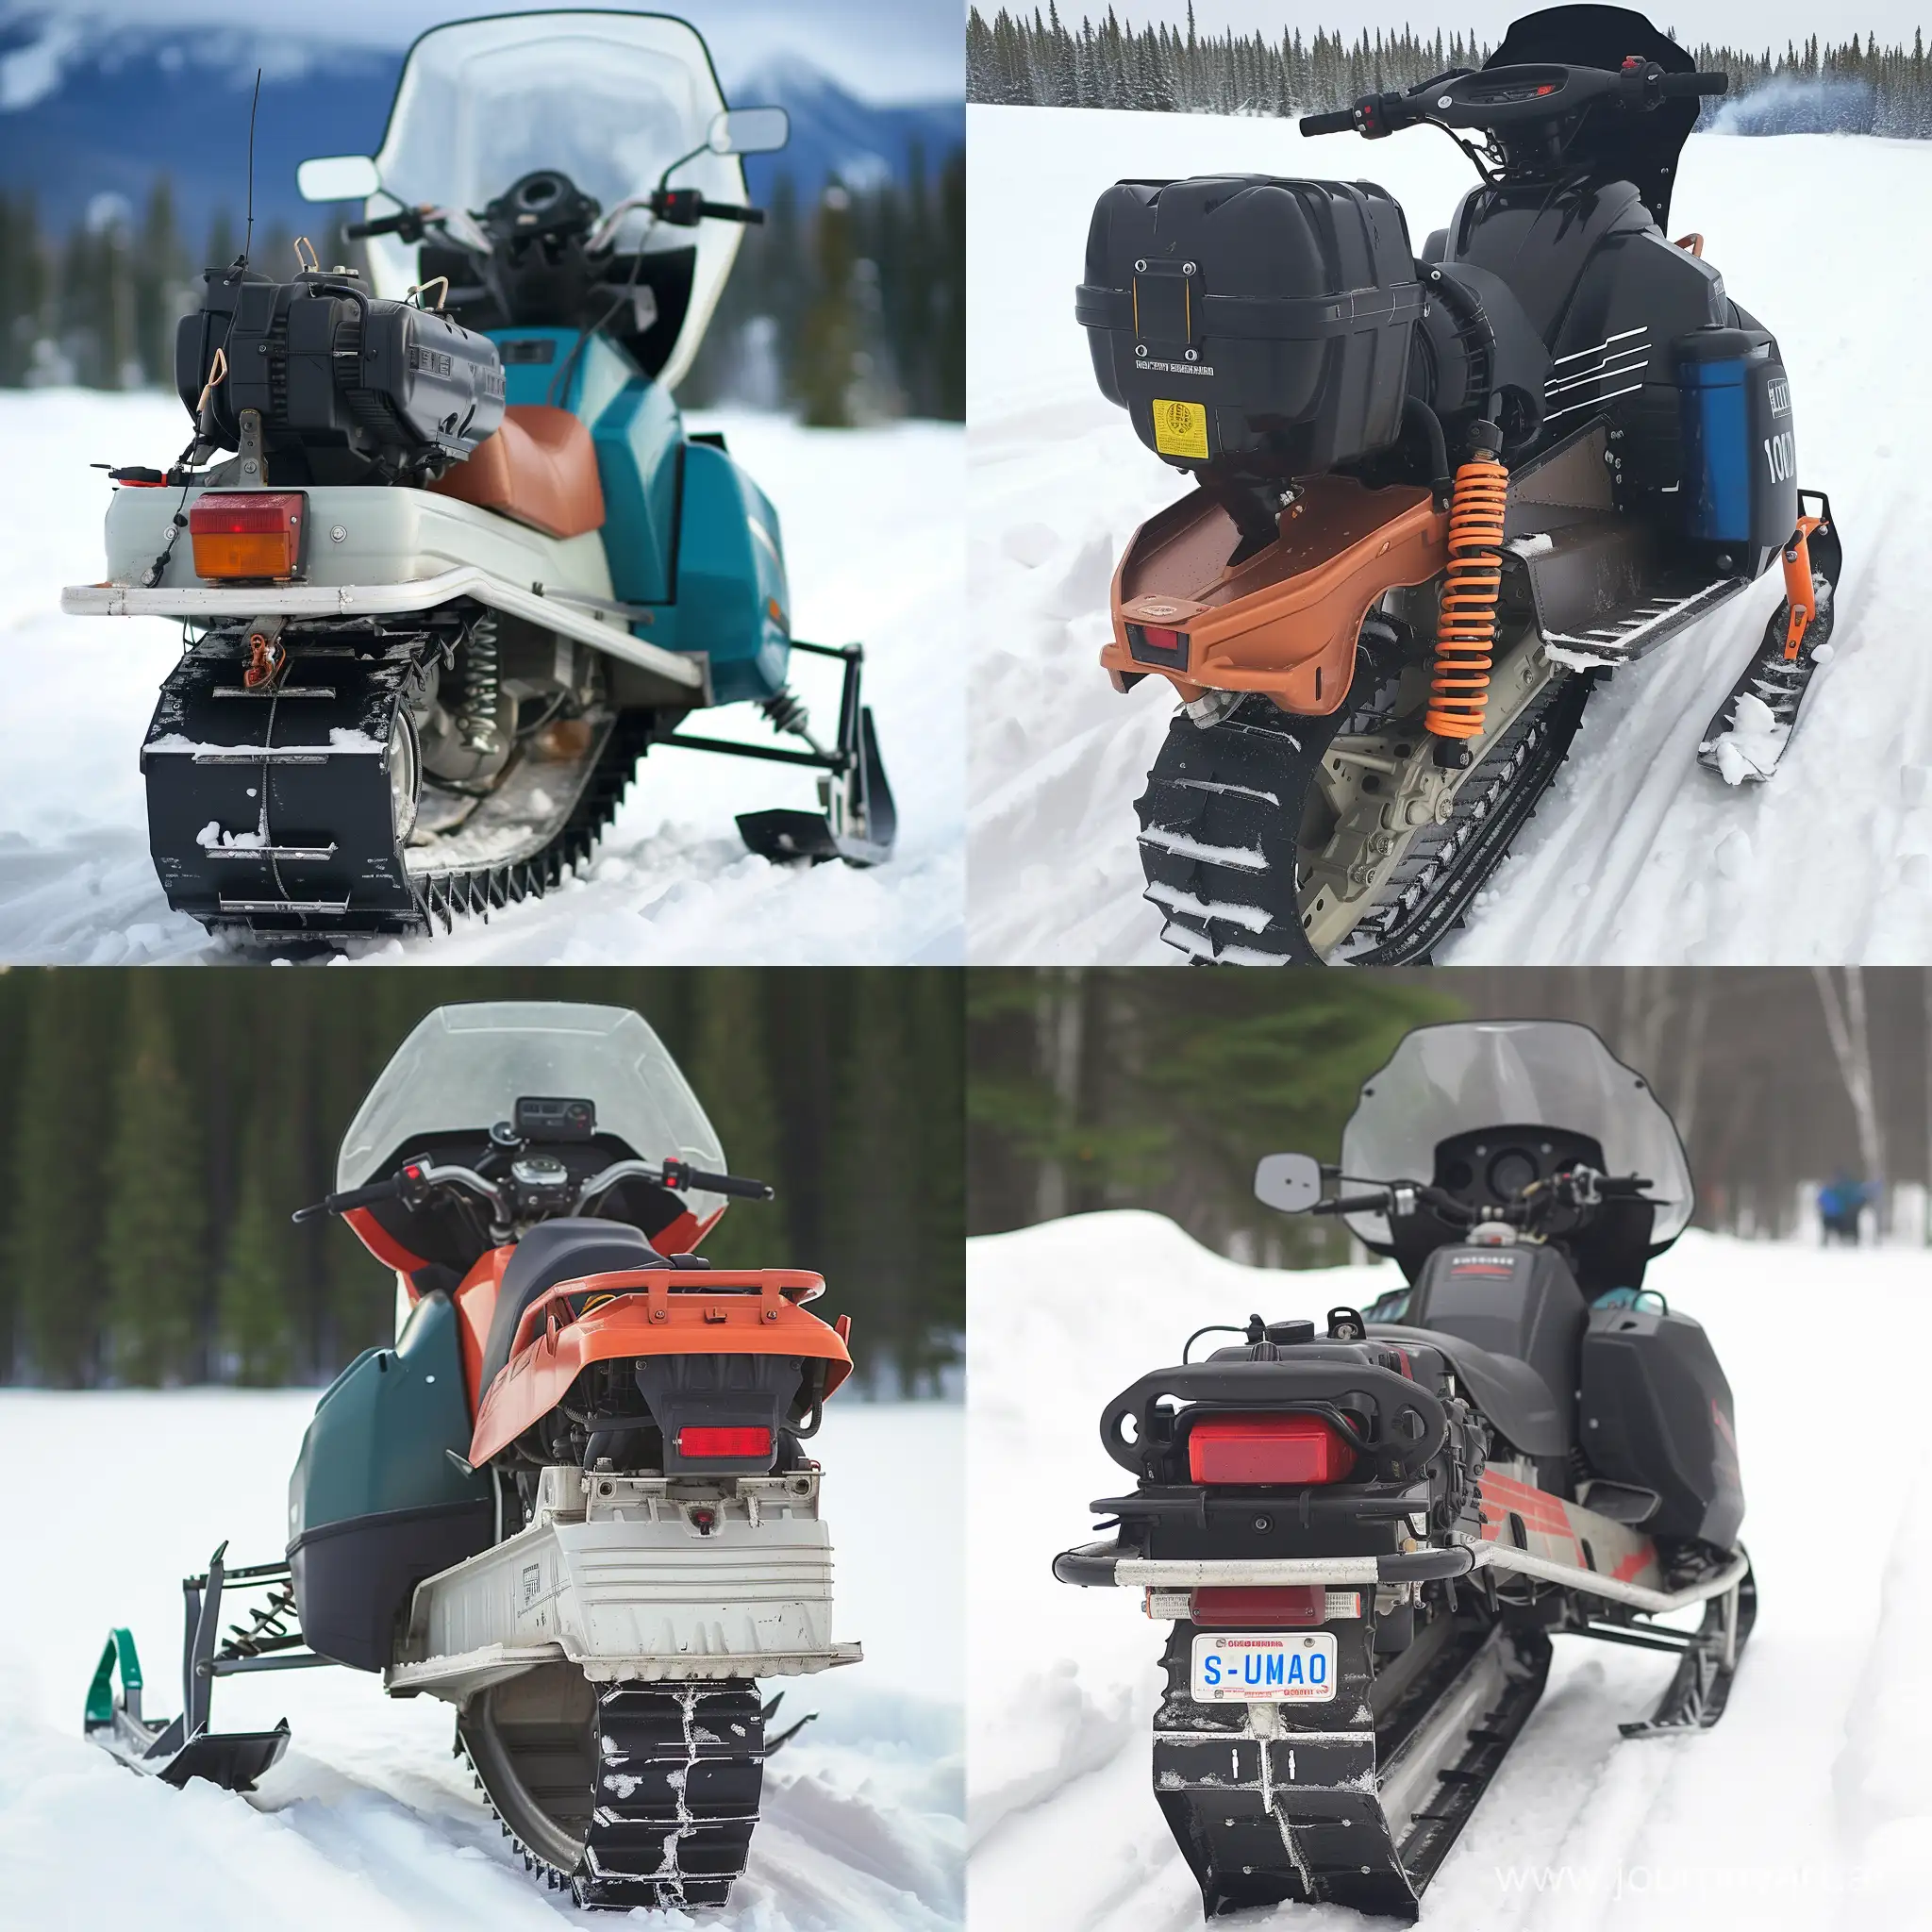 Powerful-V6-Snowmobile-Outboard-Motor-in-Action